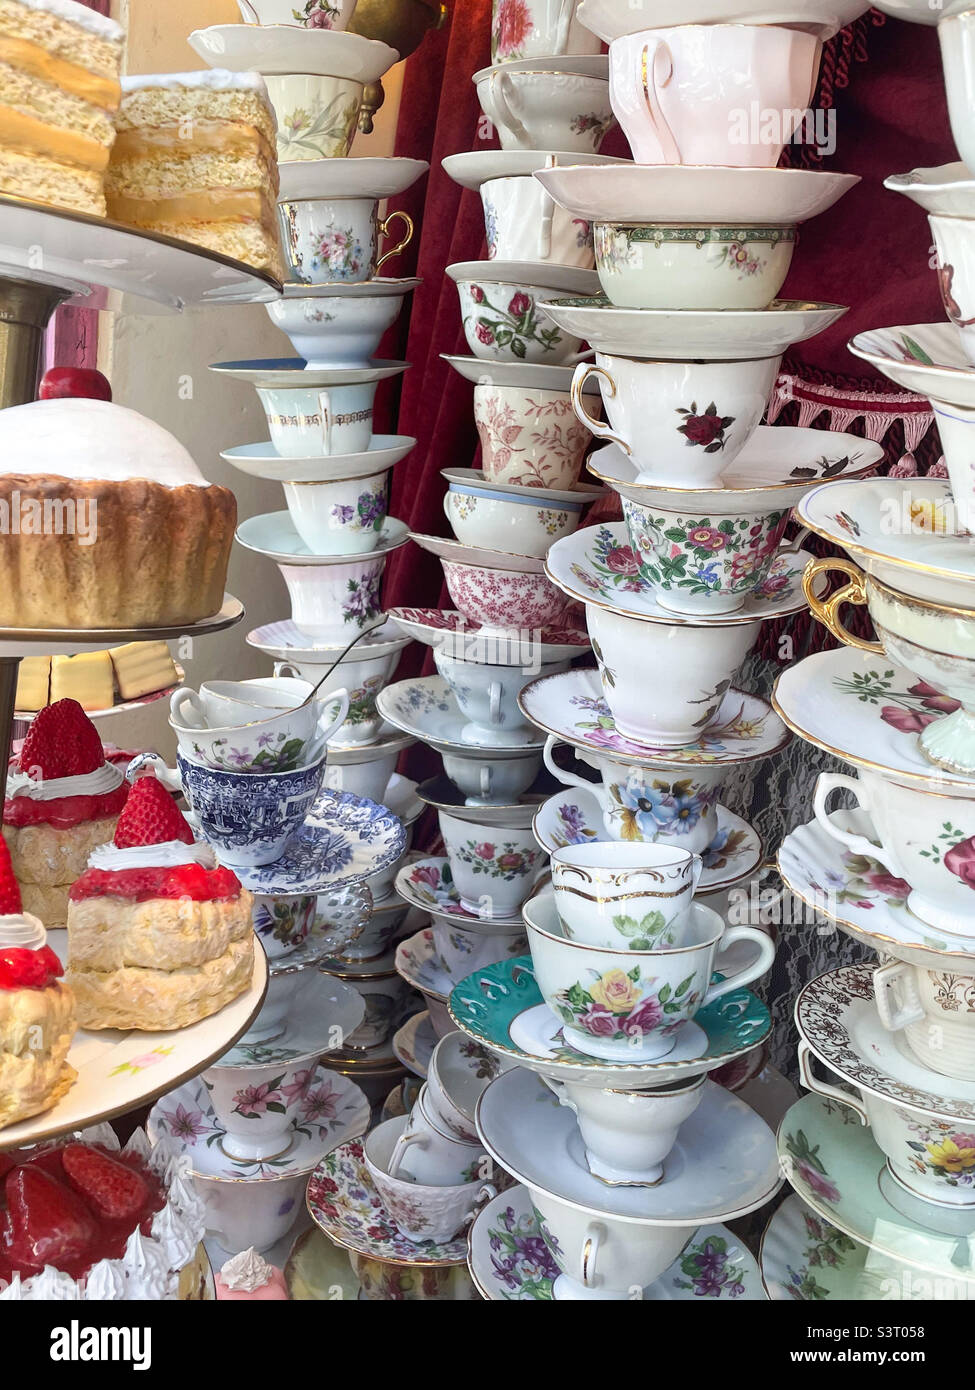 https://c8.alamy.com/comp/S3T058/precariously-stacked-teacups-found-at-a-display-window-S3T058.jpg